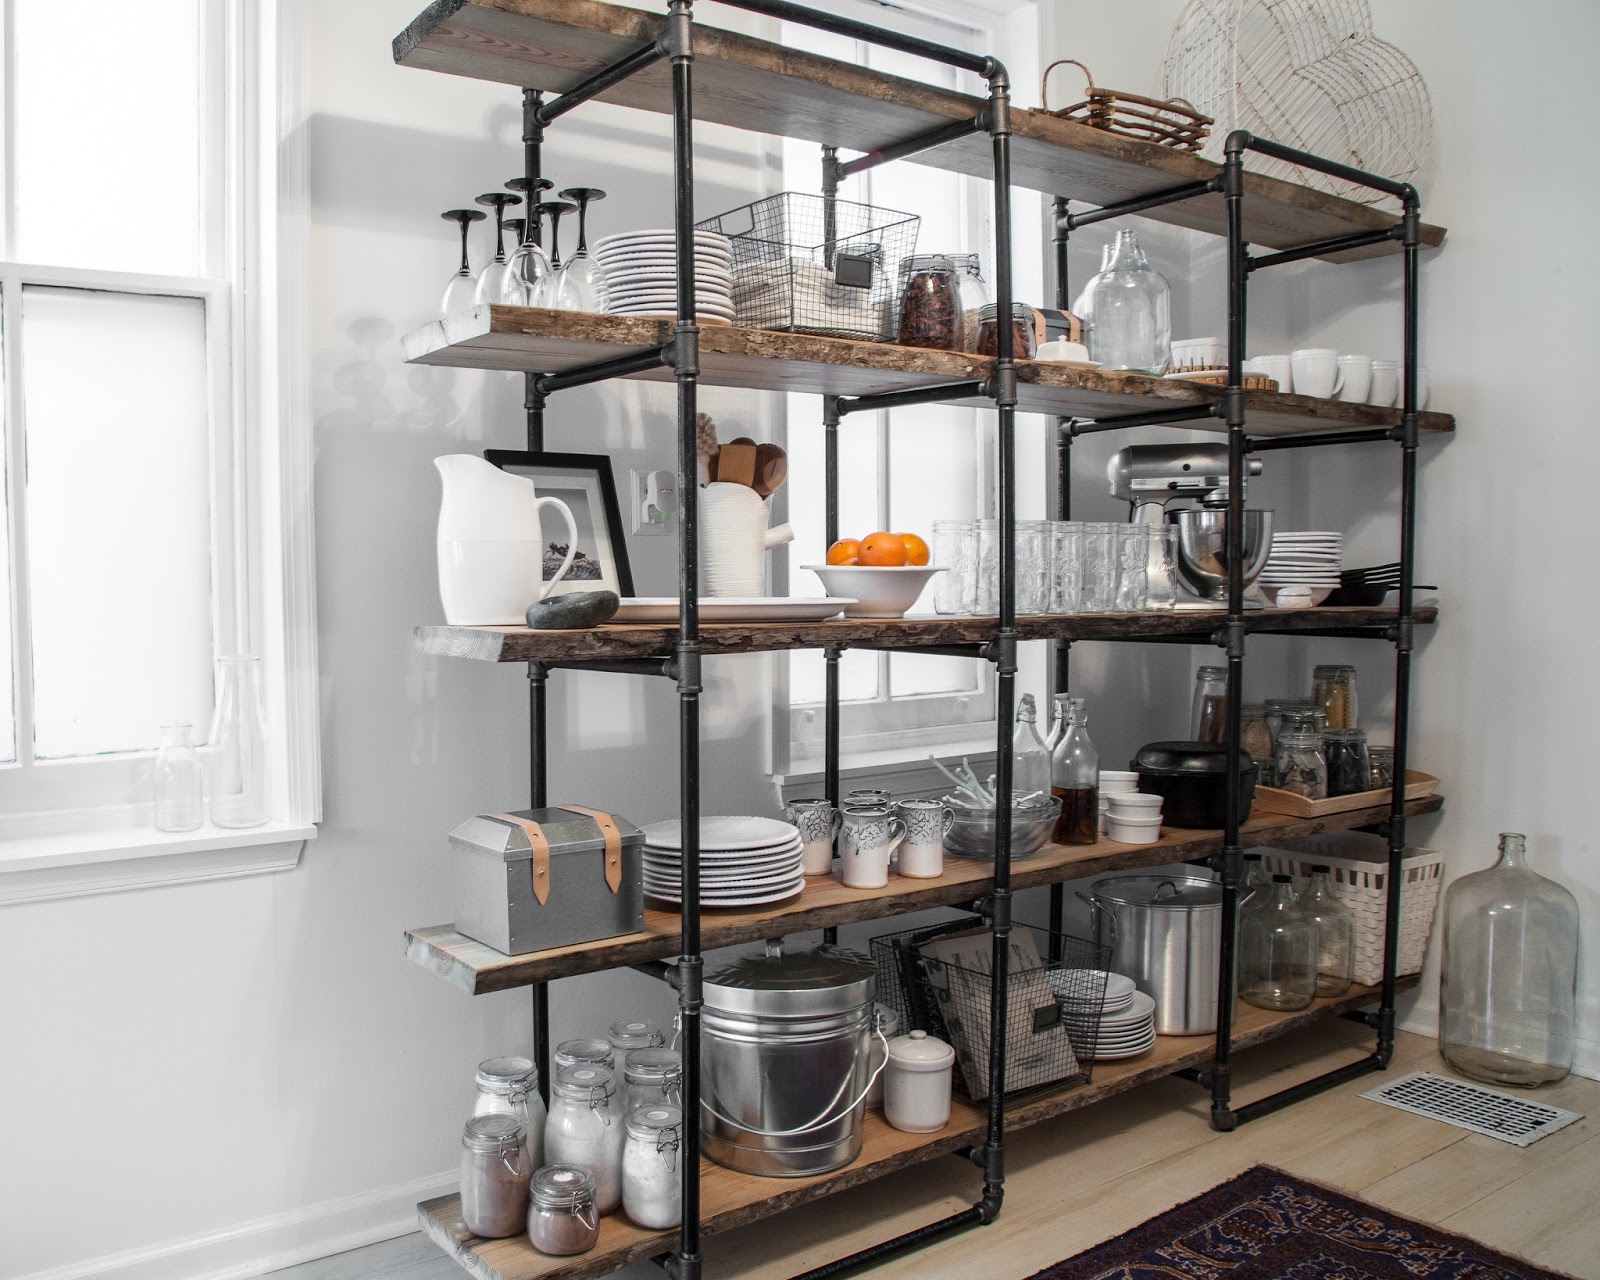 DIY Project: How to Build a Freestanding Industrial Shelf ...